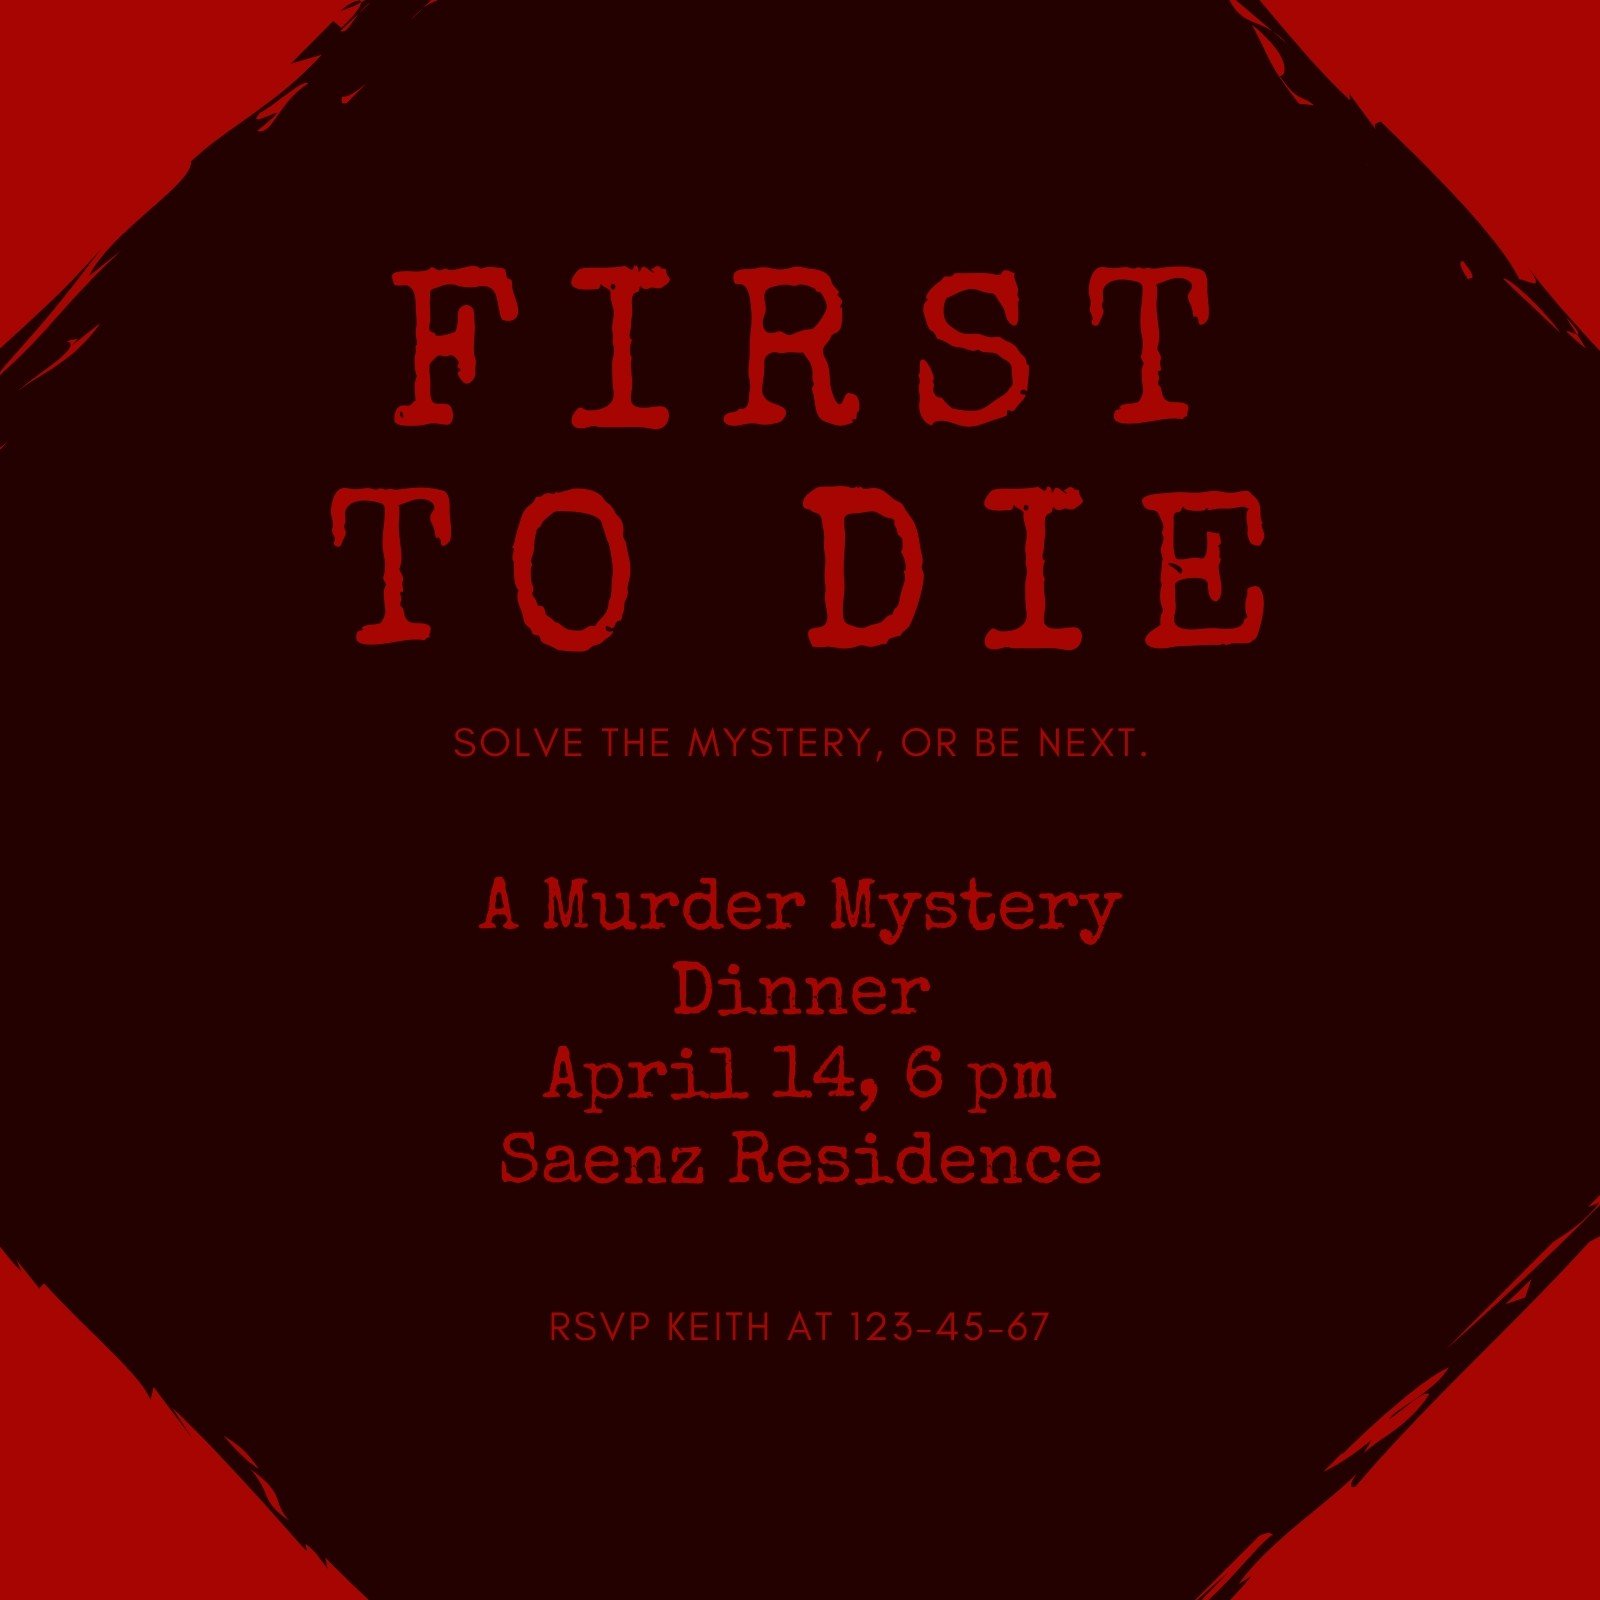 red-and-black-grungy-murder-mystery-invitation-templates-by-canva